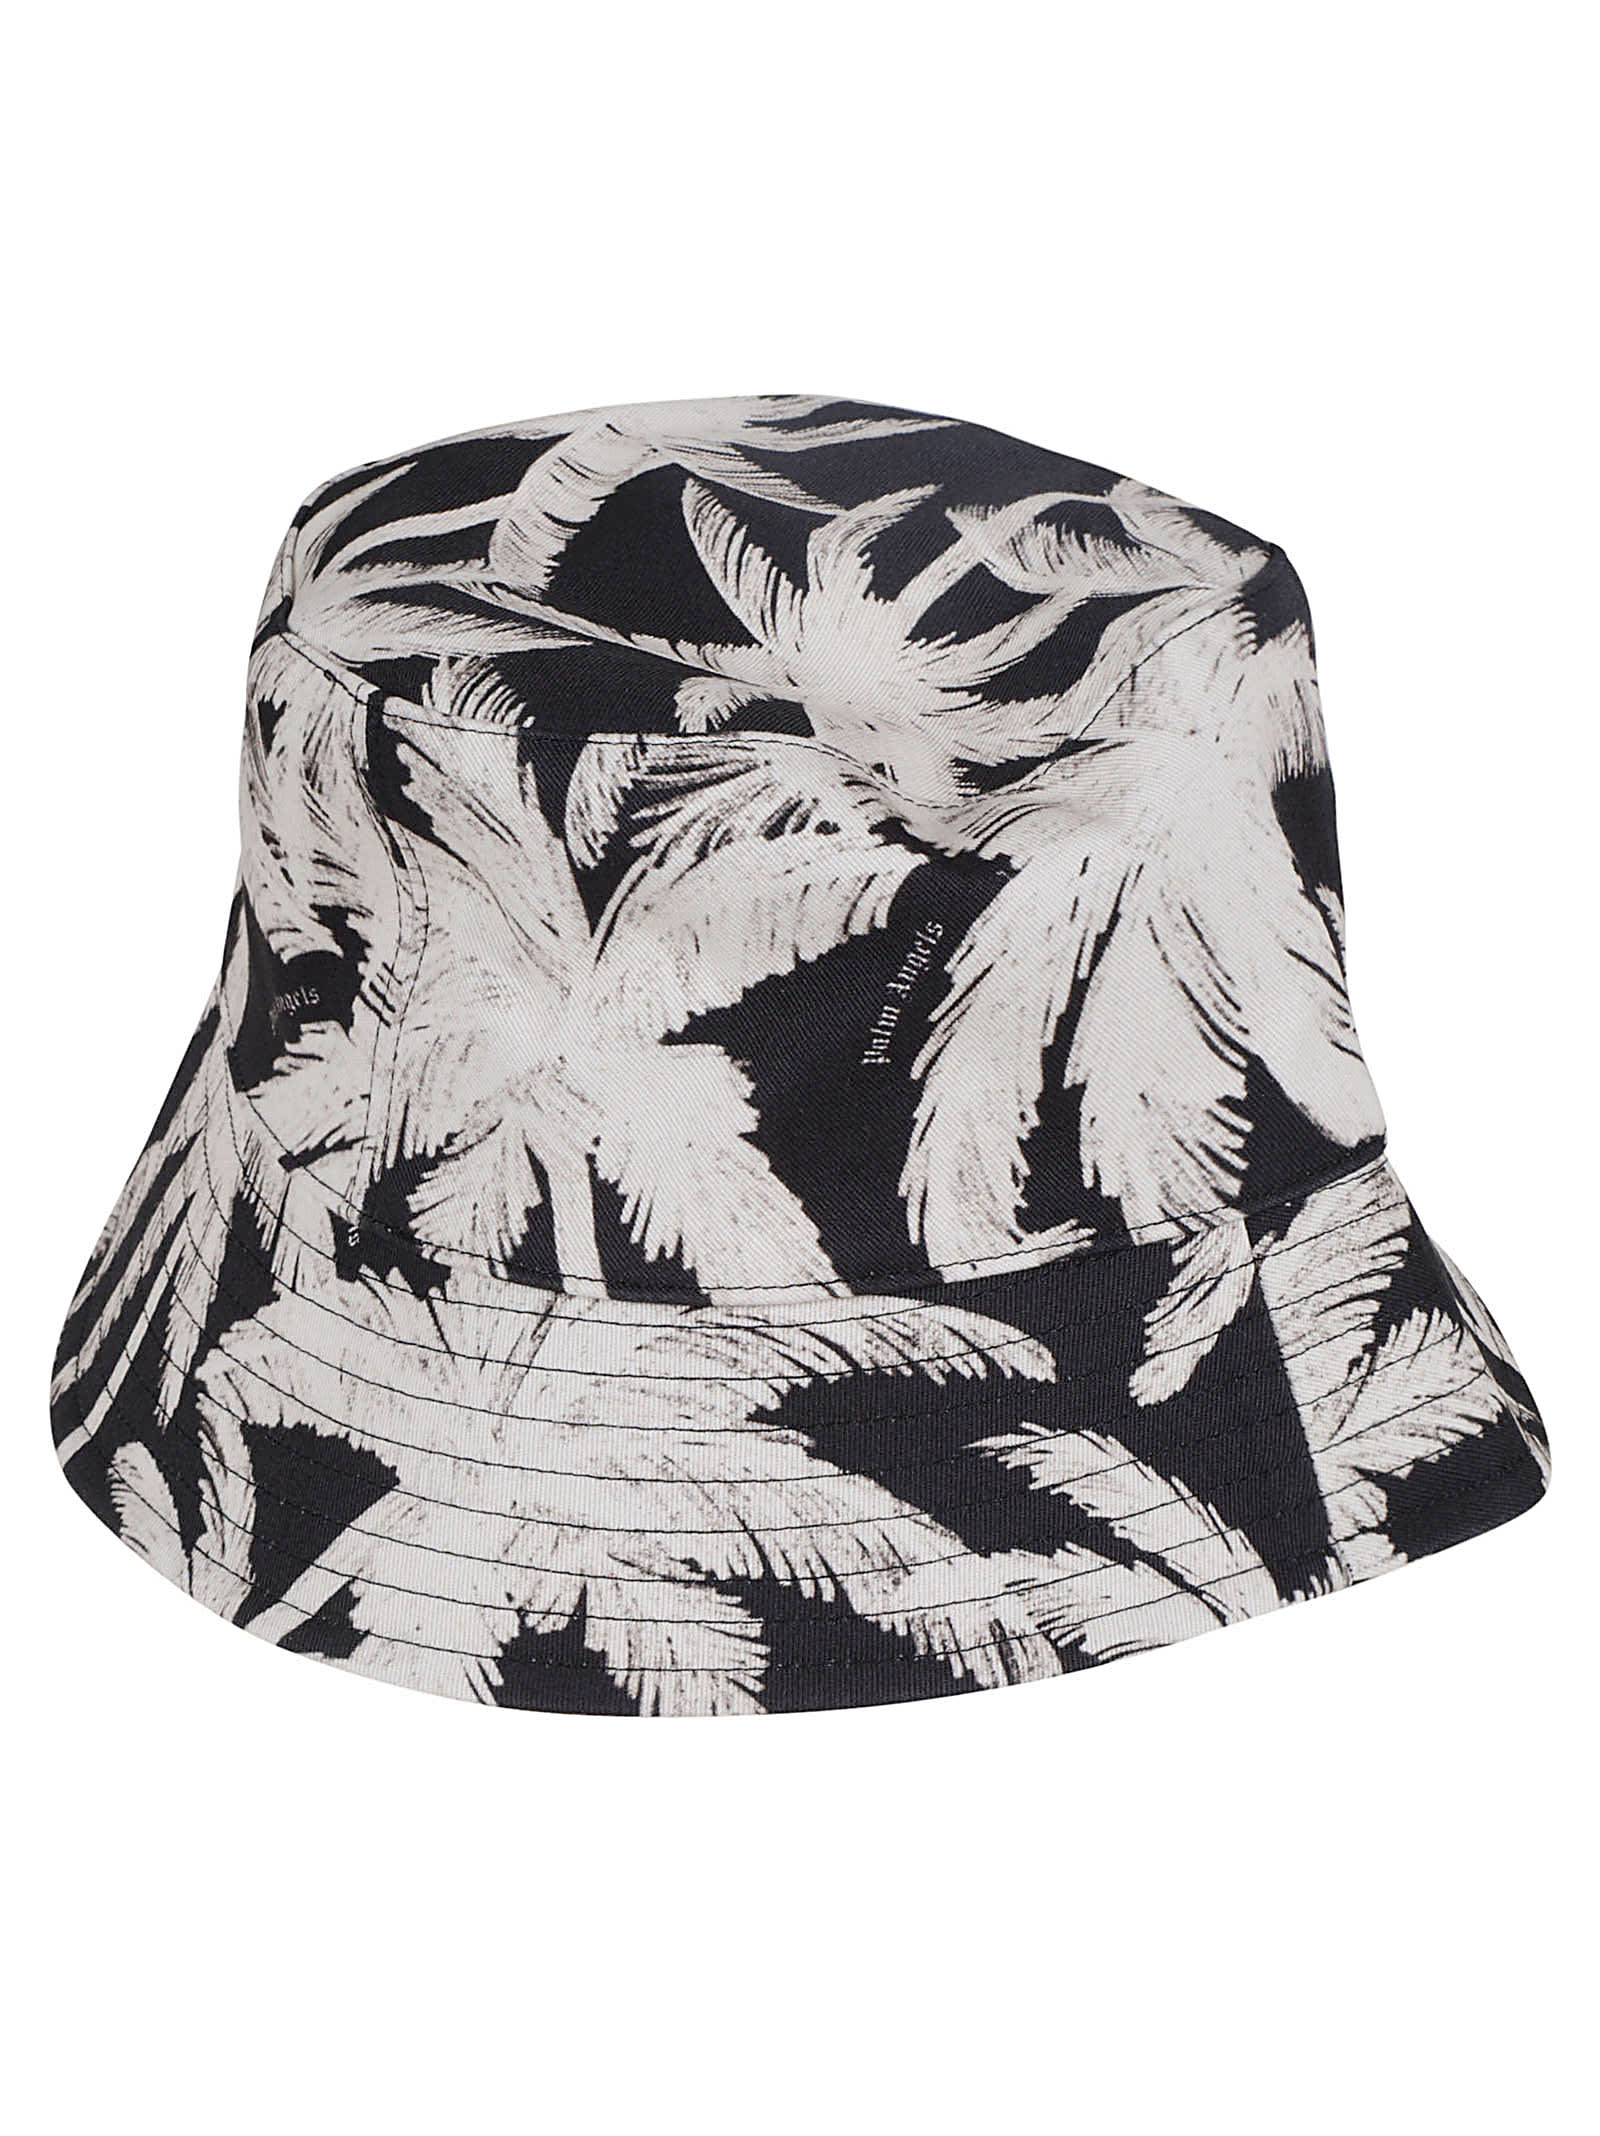 PALM ANGELS ALL-OVER BUCKET HAT